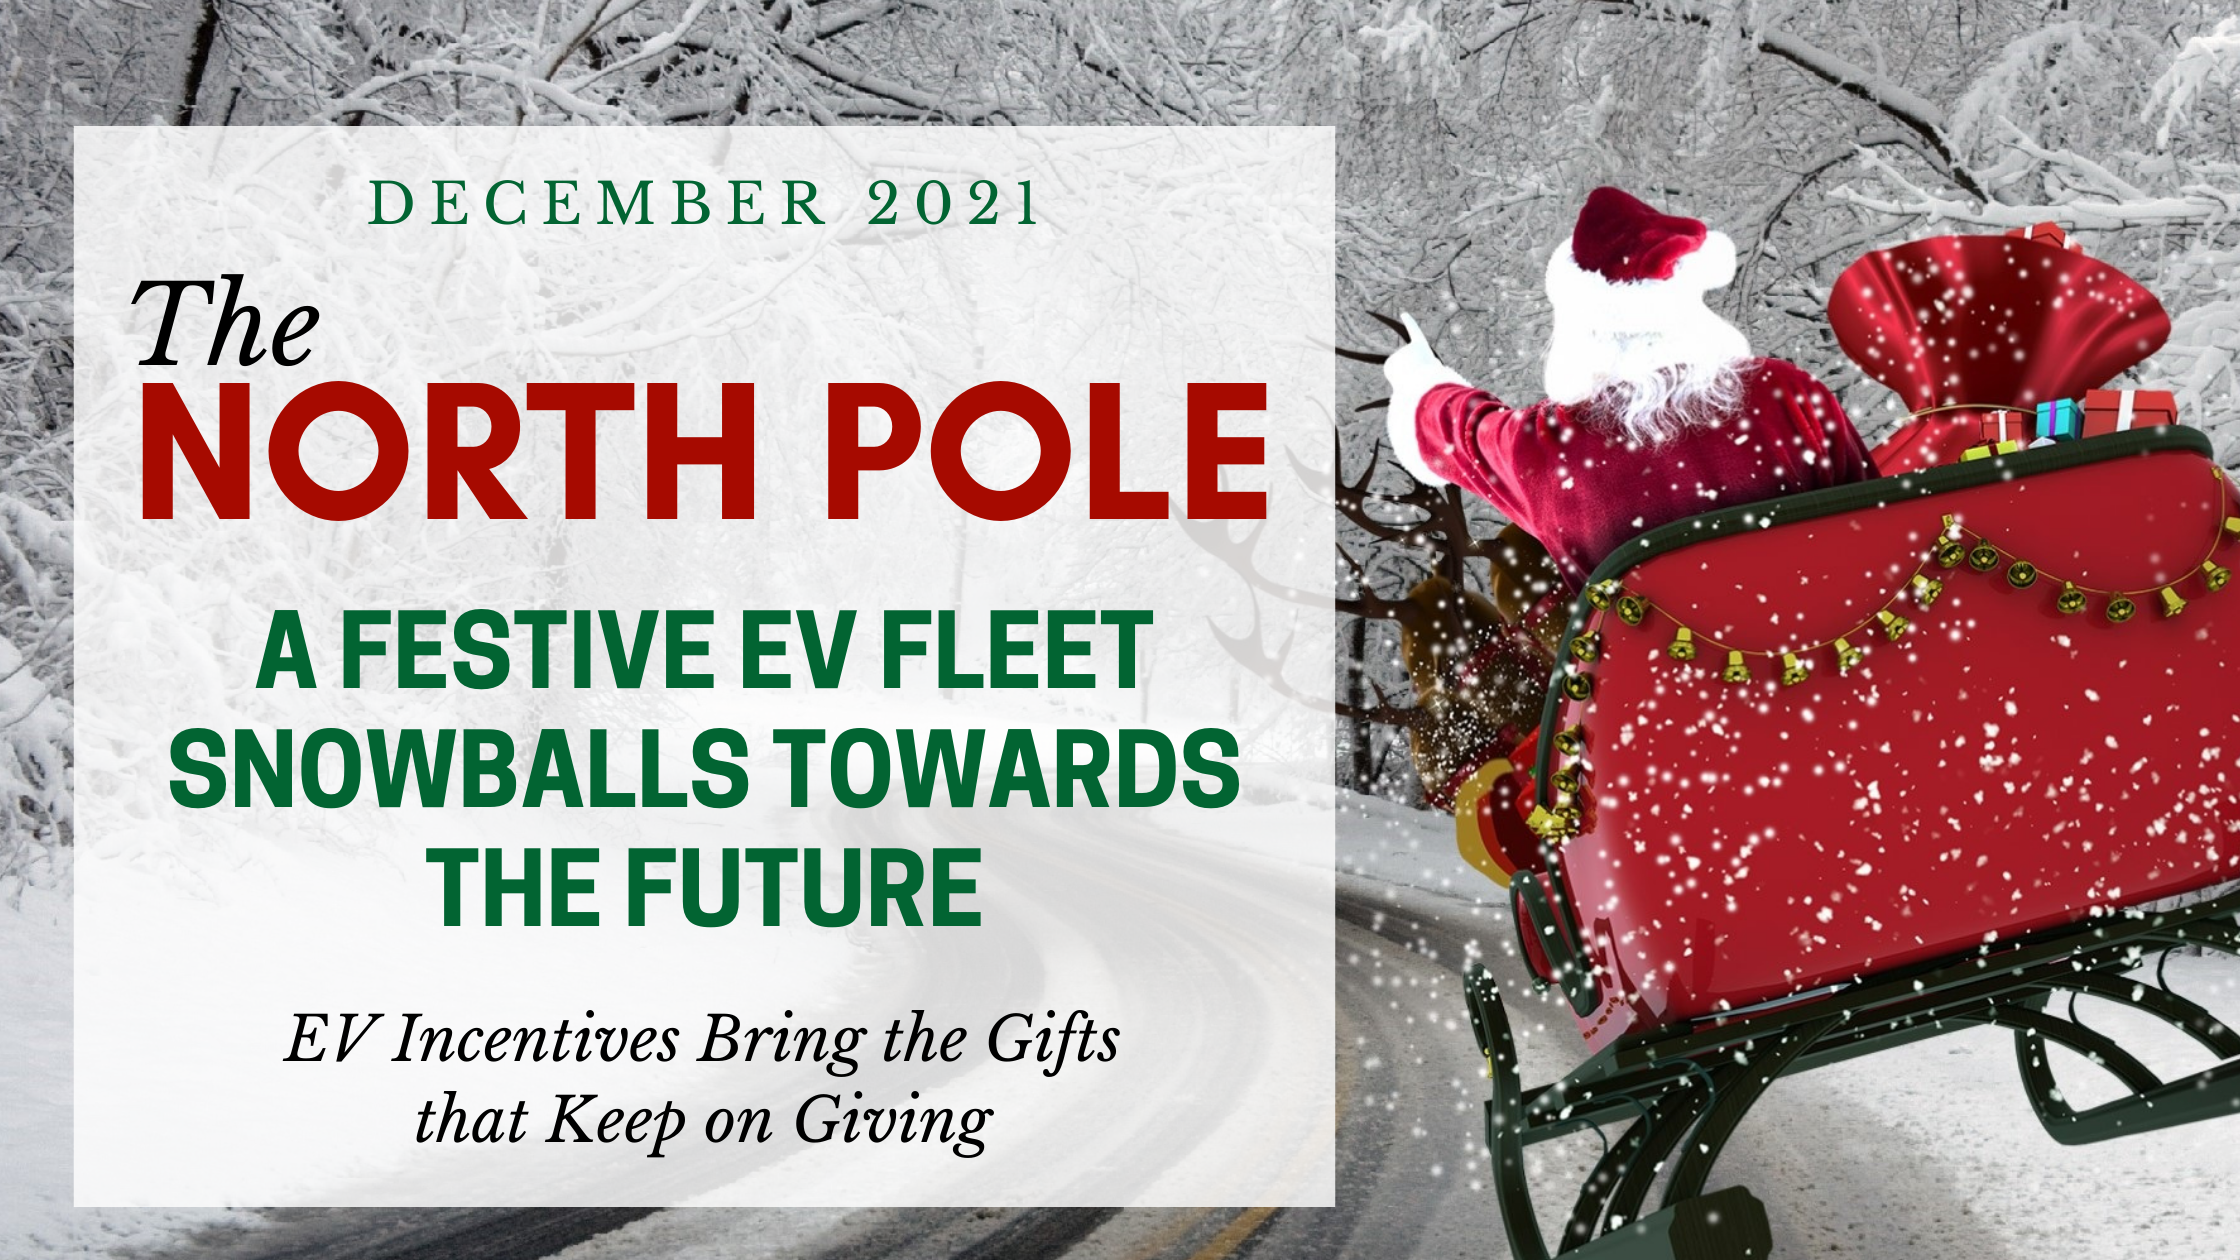 From the North Pole: A festive EV fleet snowballs towards the future